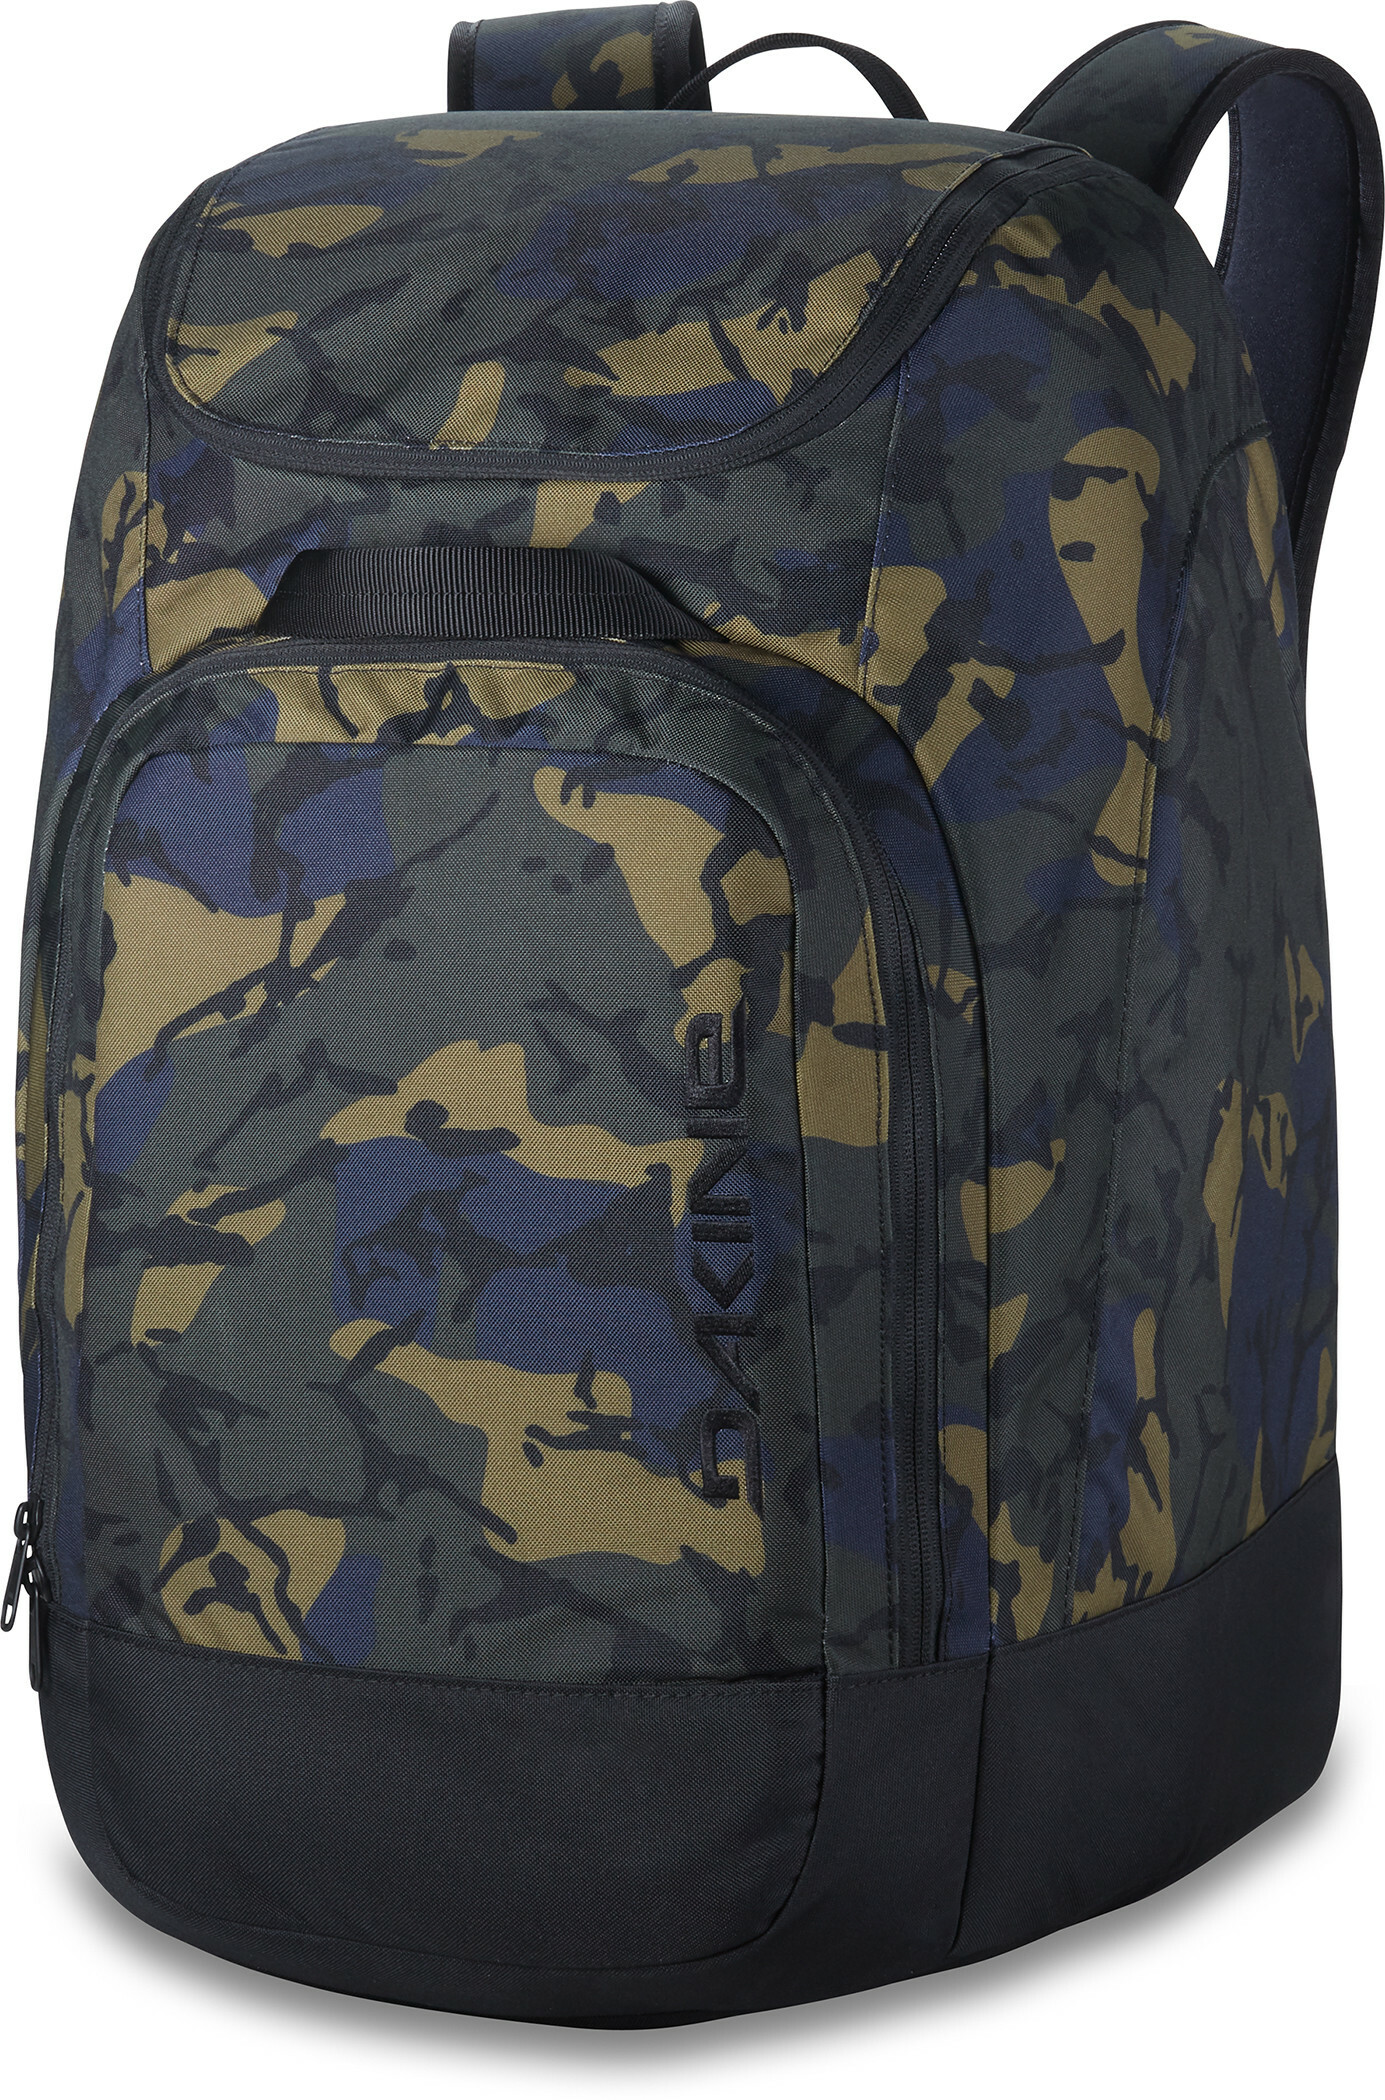 Boot Pack 50L